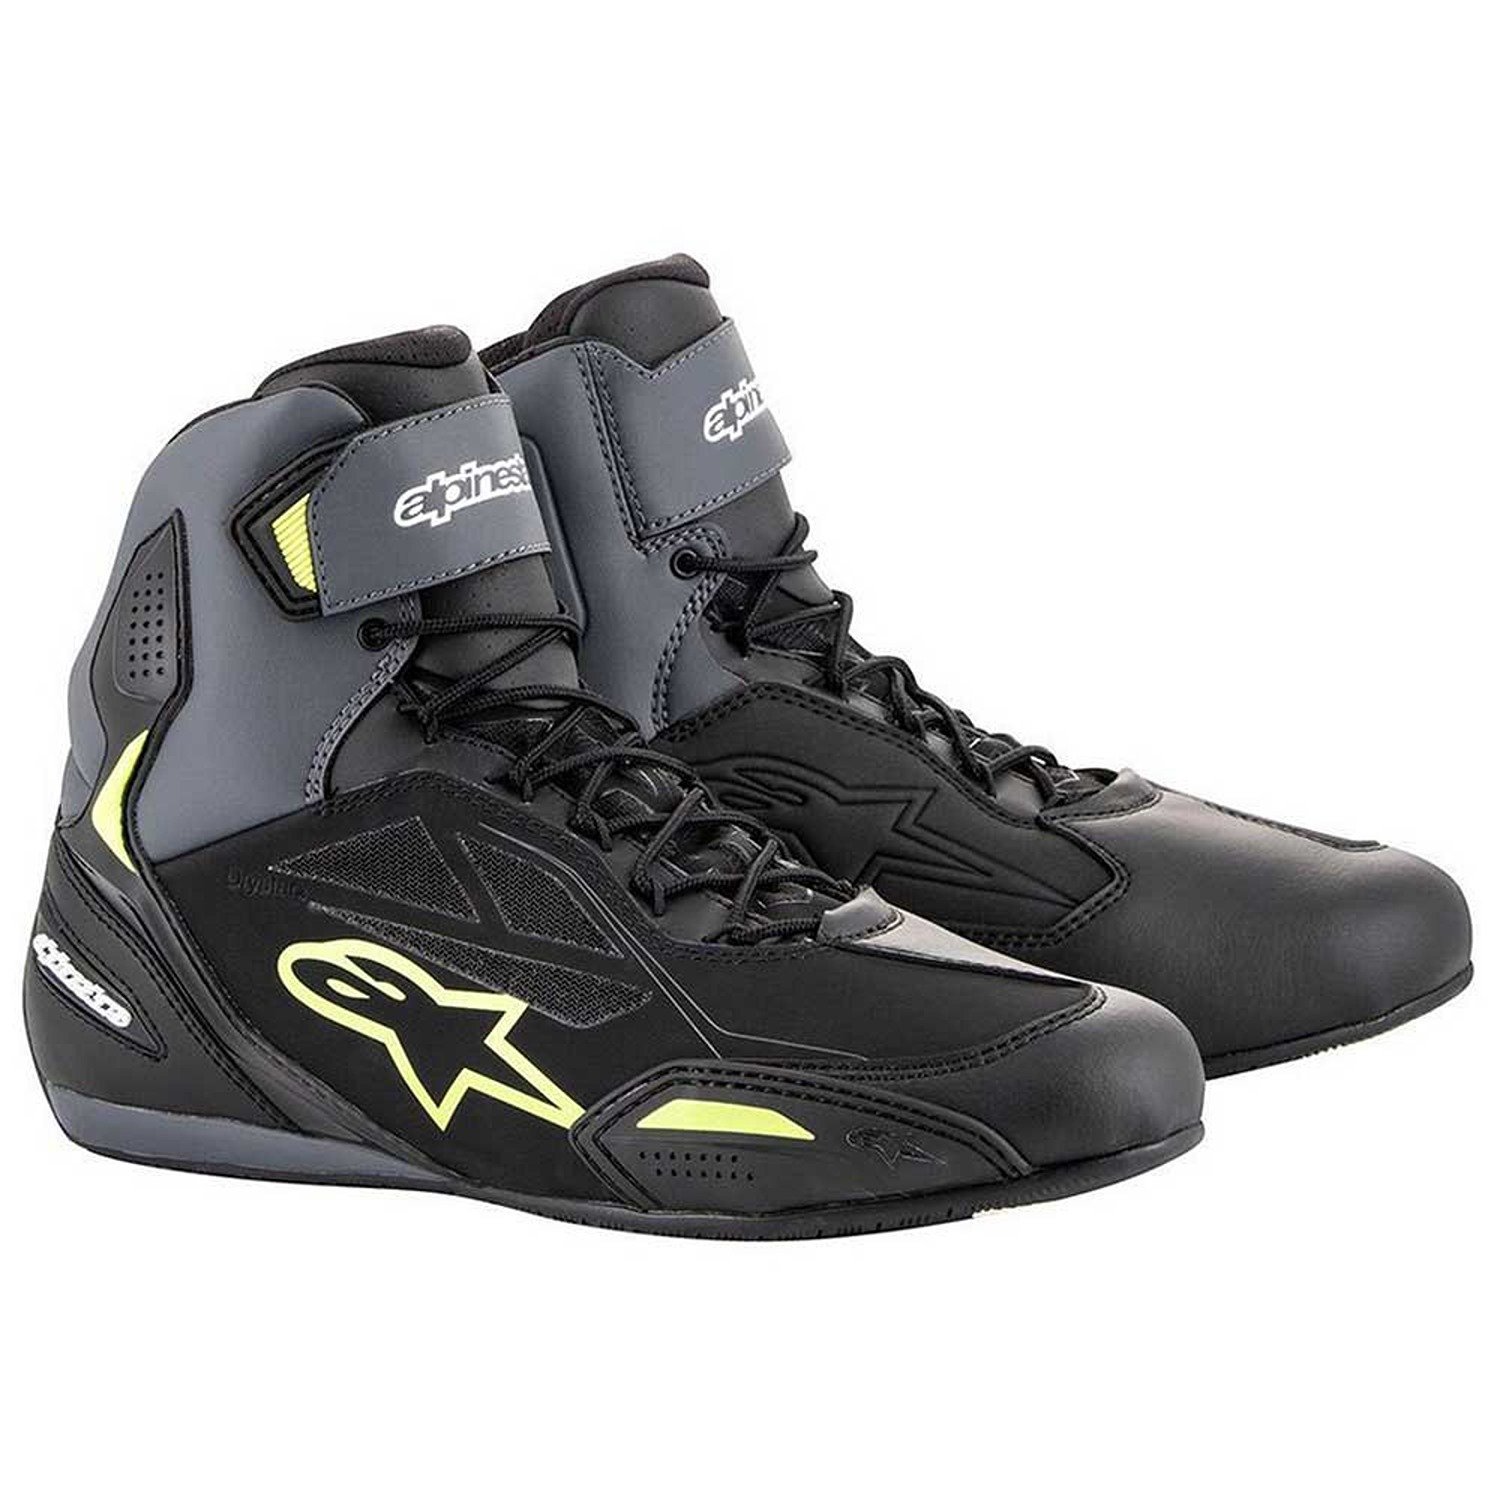 Image of Alpinestars Faster-3 Shoes Black Yellow Fluo Size US 14 EN